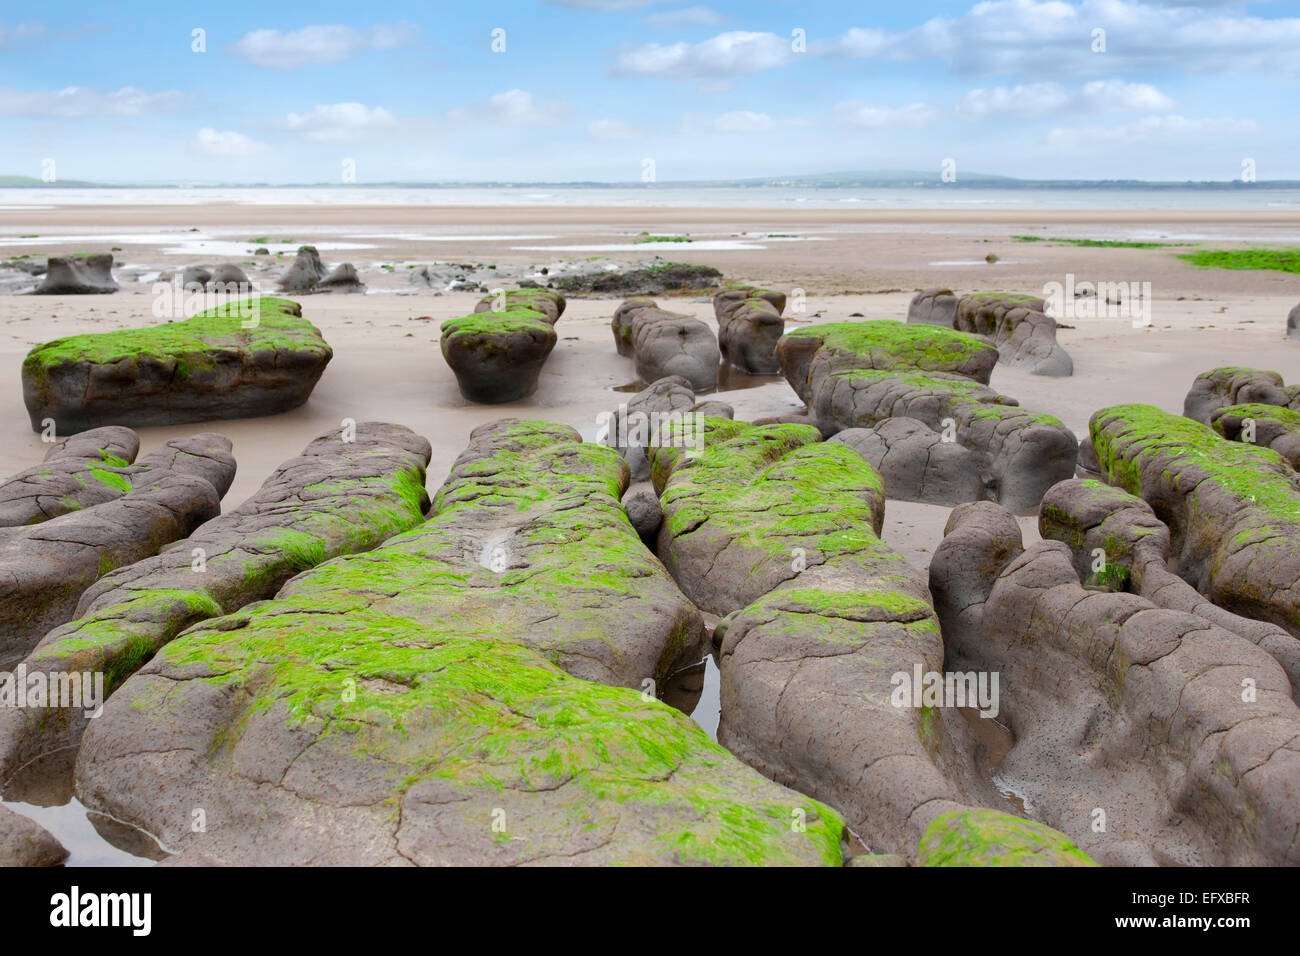 unusual mud banks at Beal beach in county Kerry Ireland on the wild Atlantic way Stock Photo